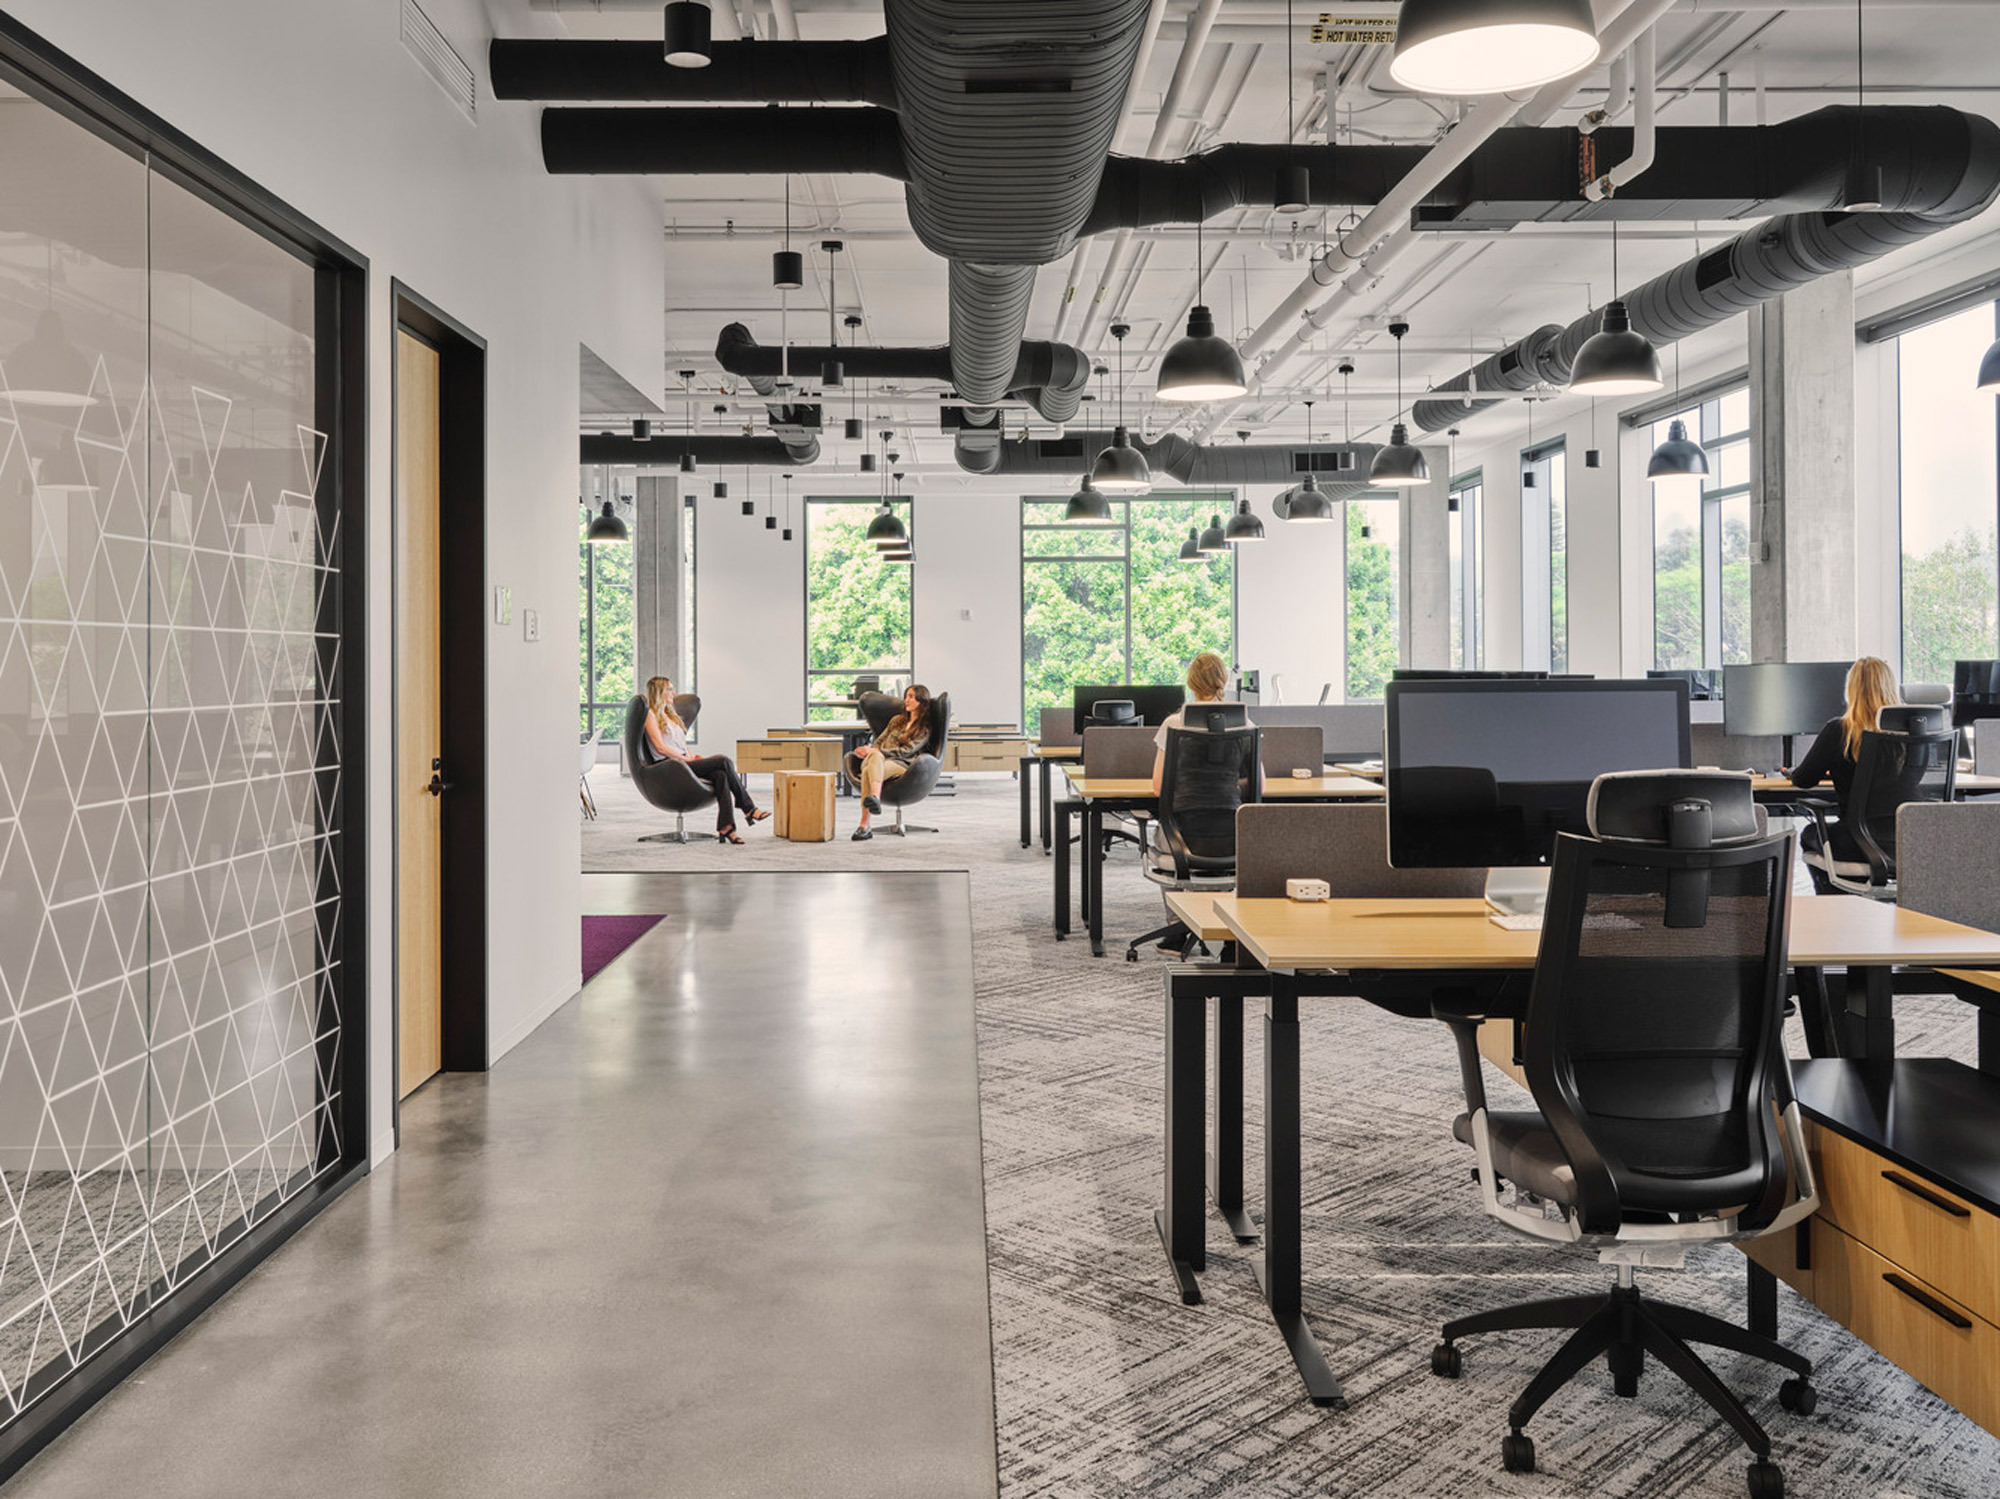 Modern office space with an open floor plan featuring exposed ductwork, sleek furnishings, and geometric glass partitions. Natural light permeates, illuminating the gray-patterned carpet and collaborative workstations.